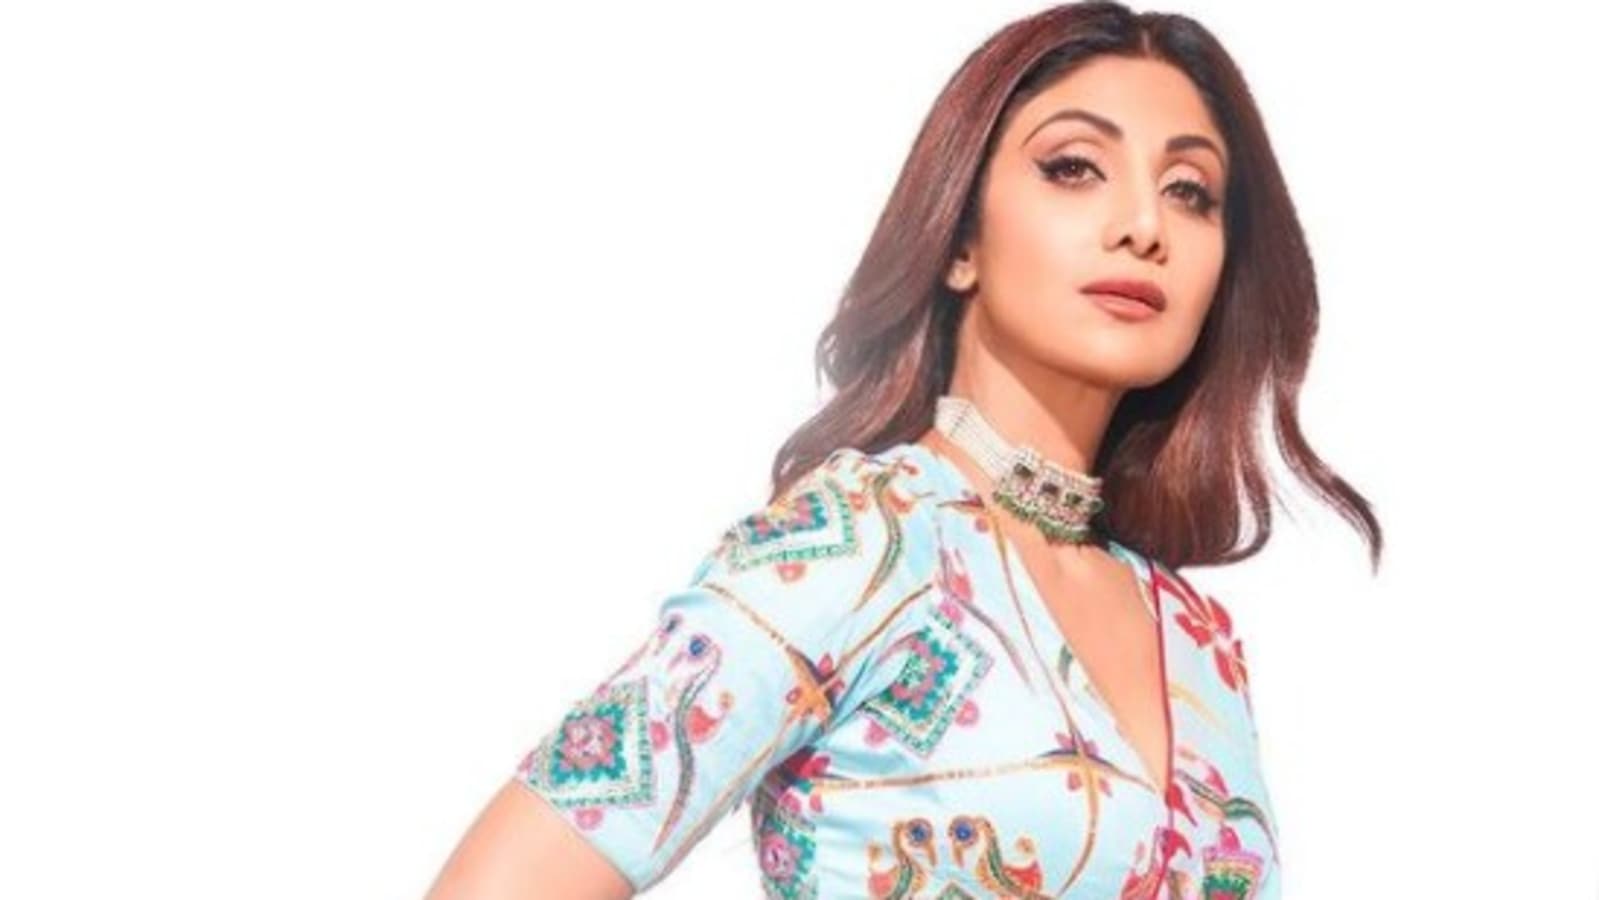 Xxx Video Shilpa Shetty Ki Bf - Shilpa Shetty shares pics from first photoshoot after Raj Kundra's arrest,  is 'determined to rise'. See here | Bollywood - Hindustan Times